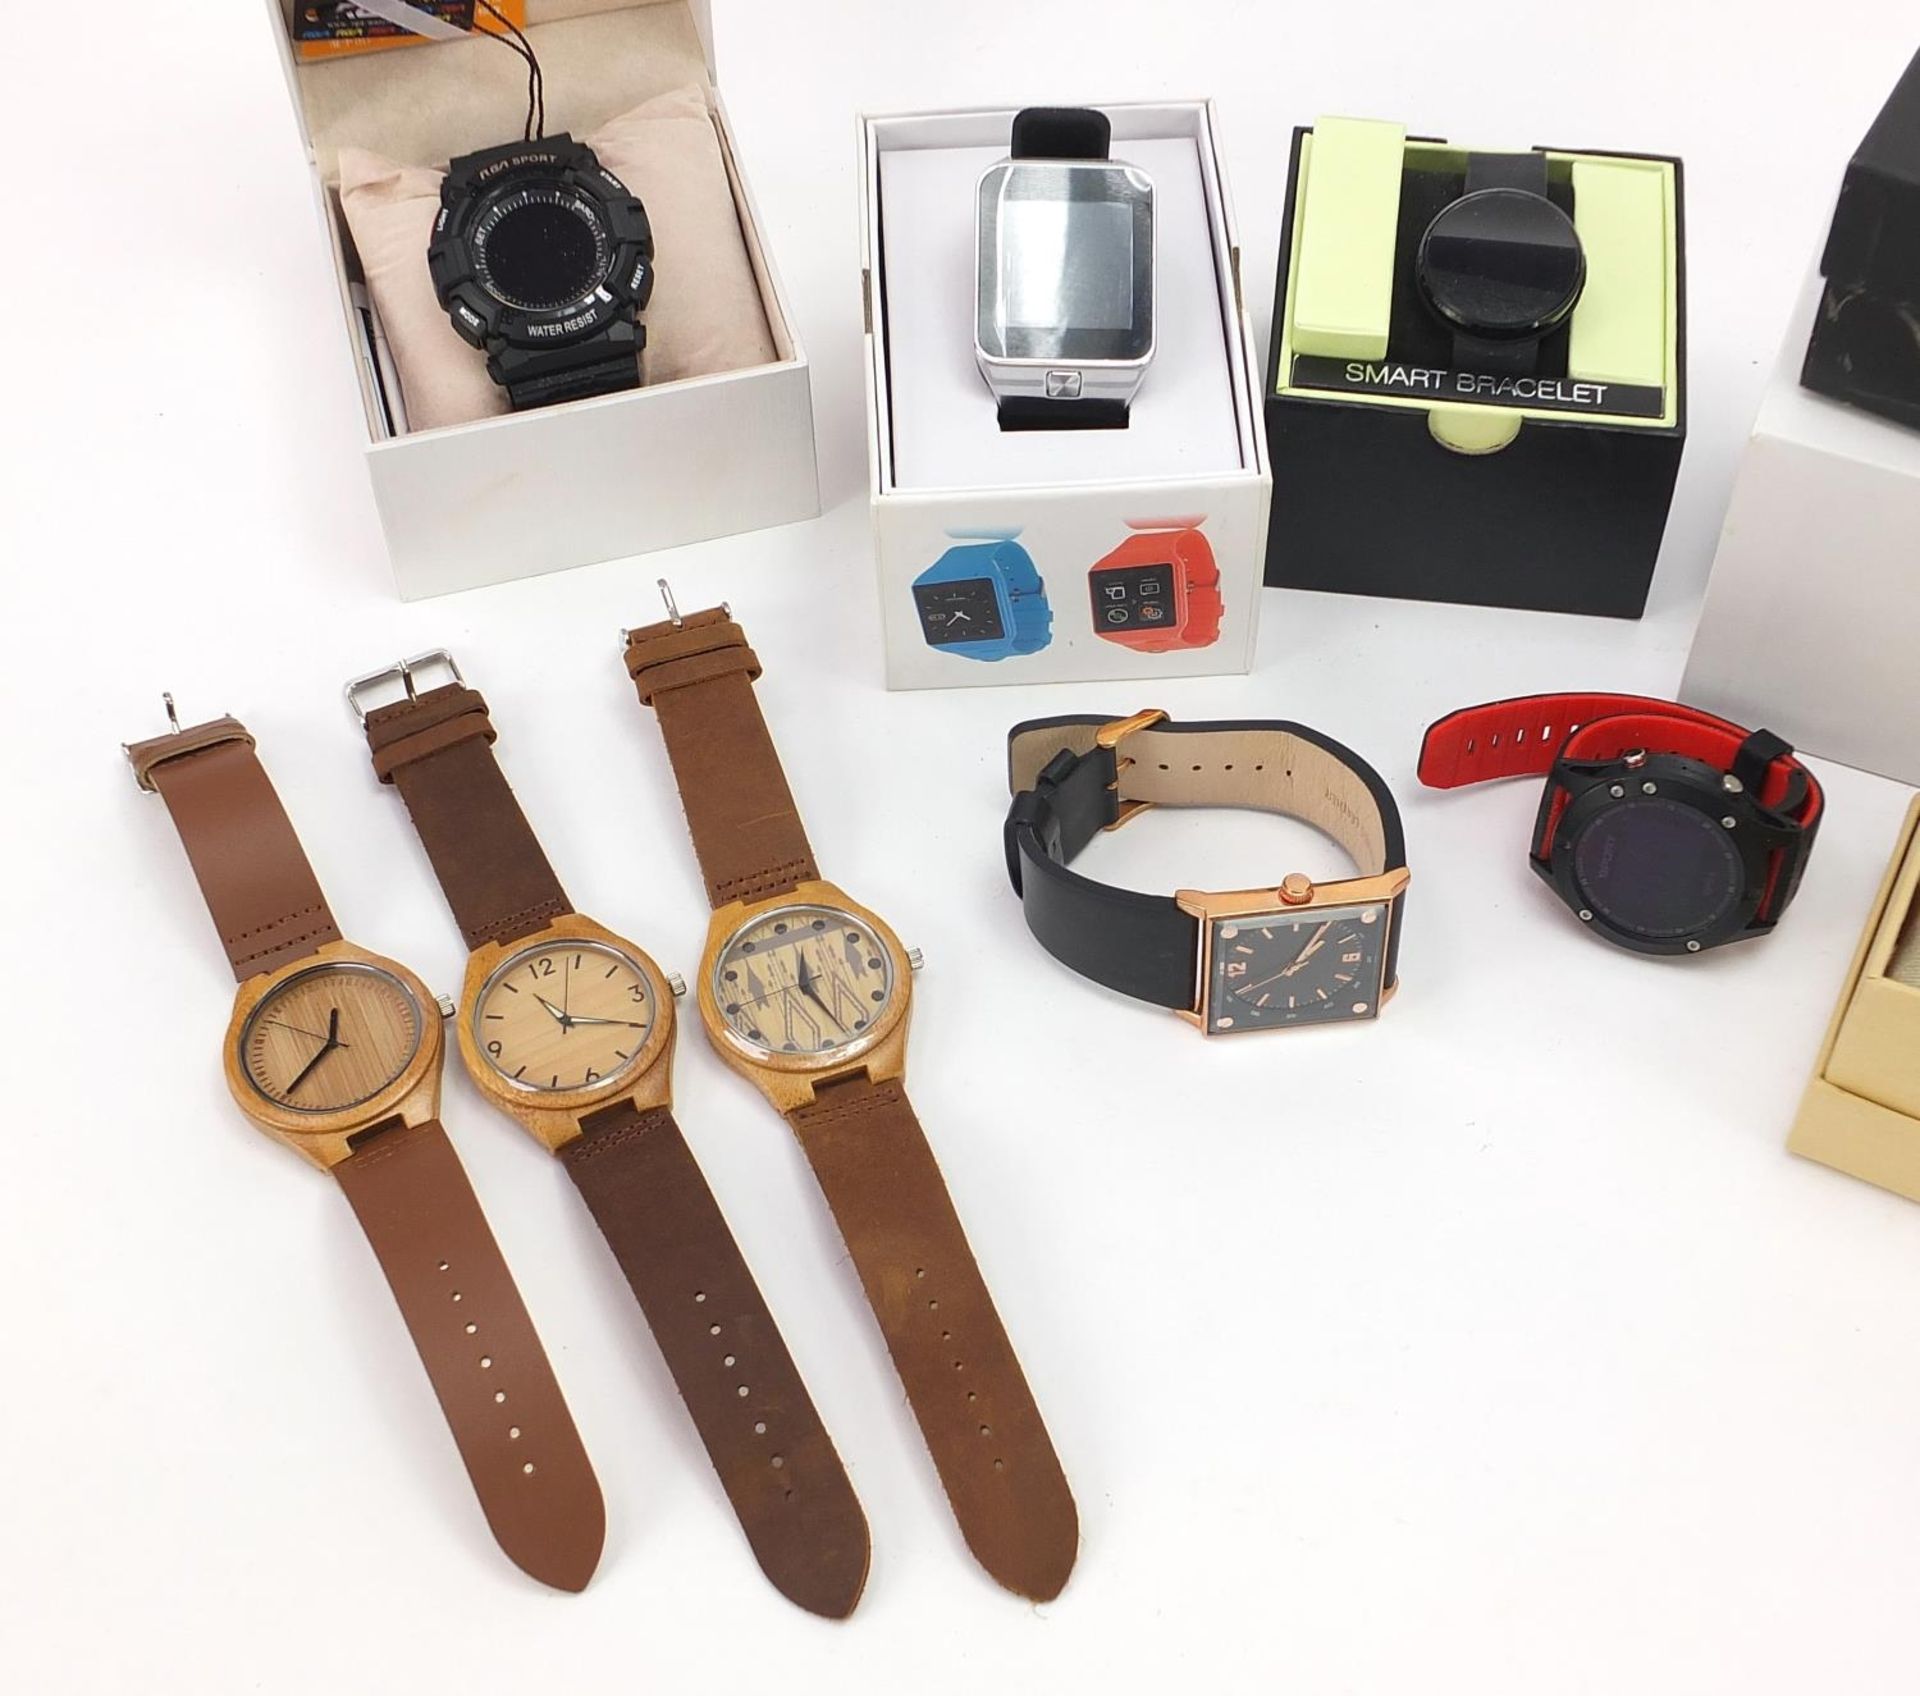 Thirteen gentlemen's wristwatches with boxes including android smart watch, DWG, Songdu, RGA - Image 2 of 3